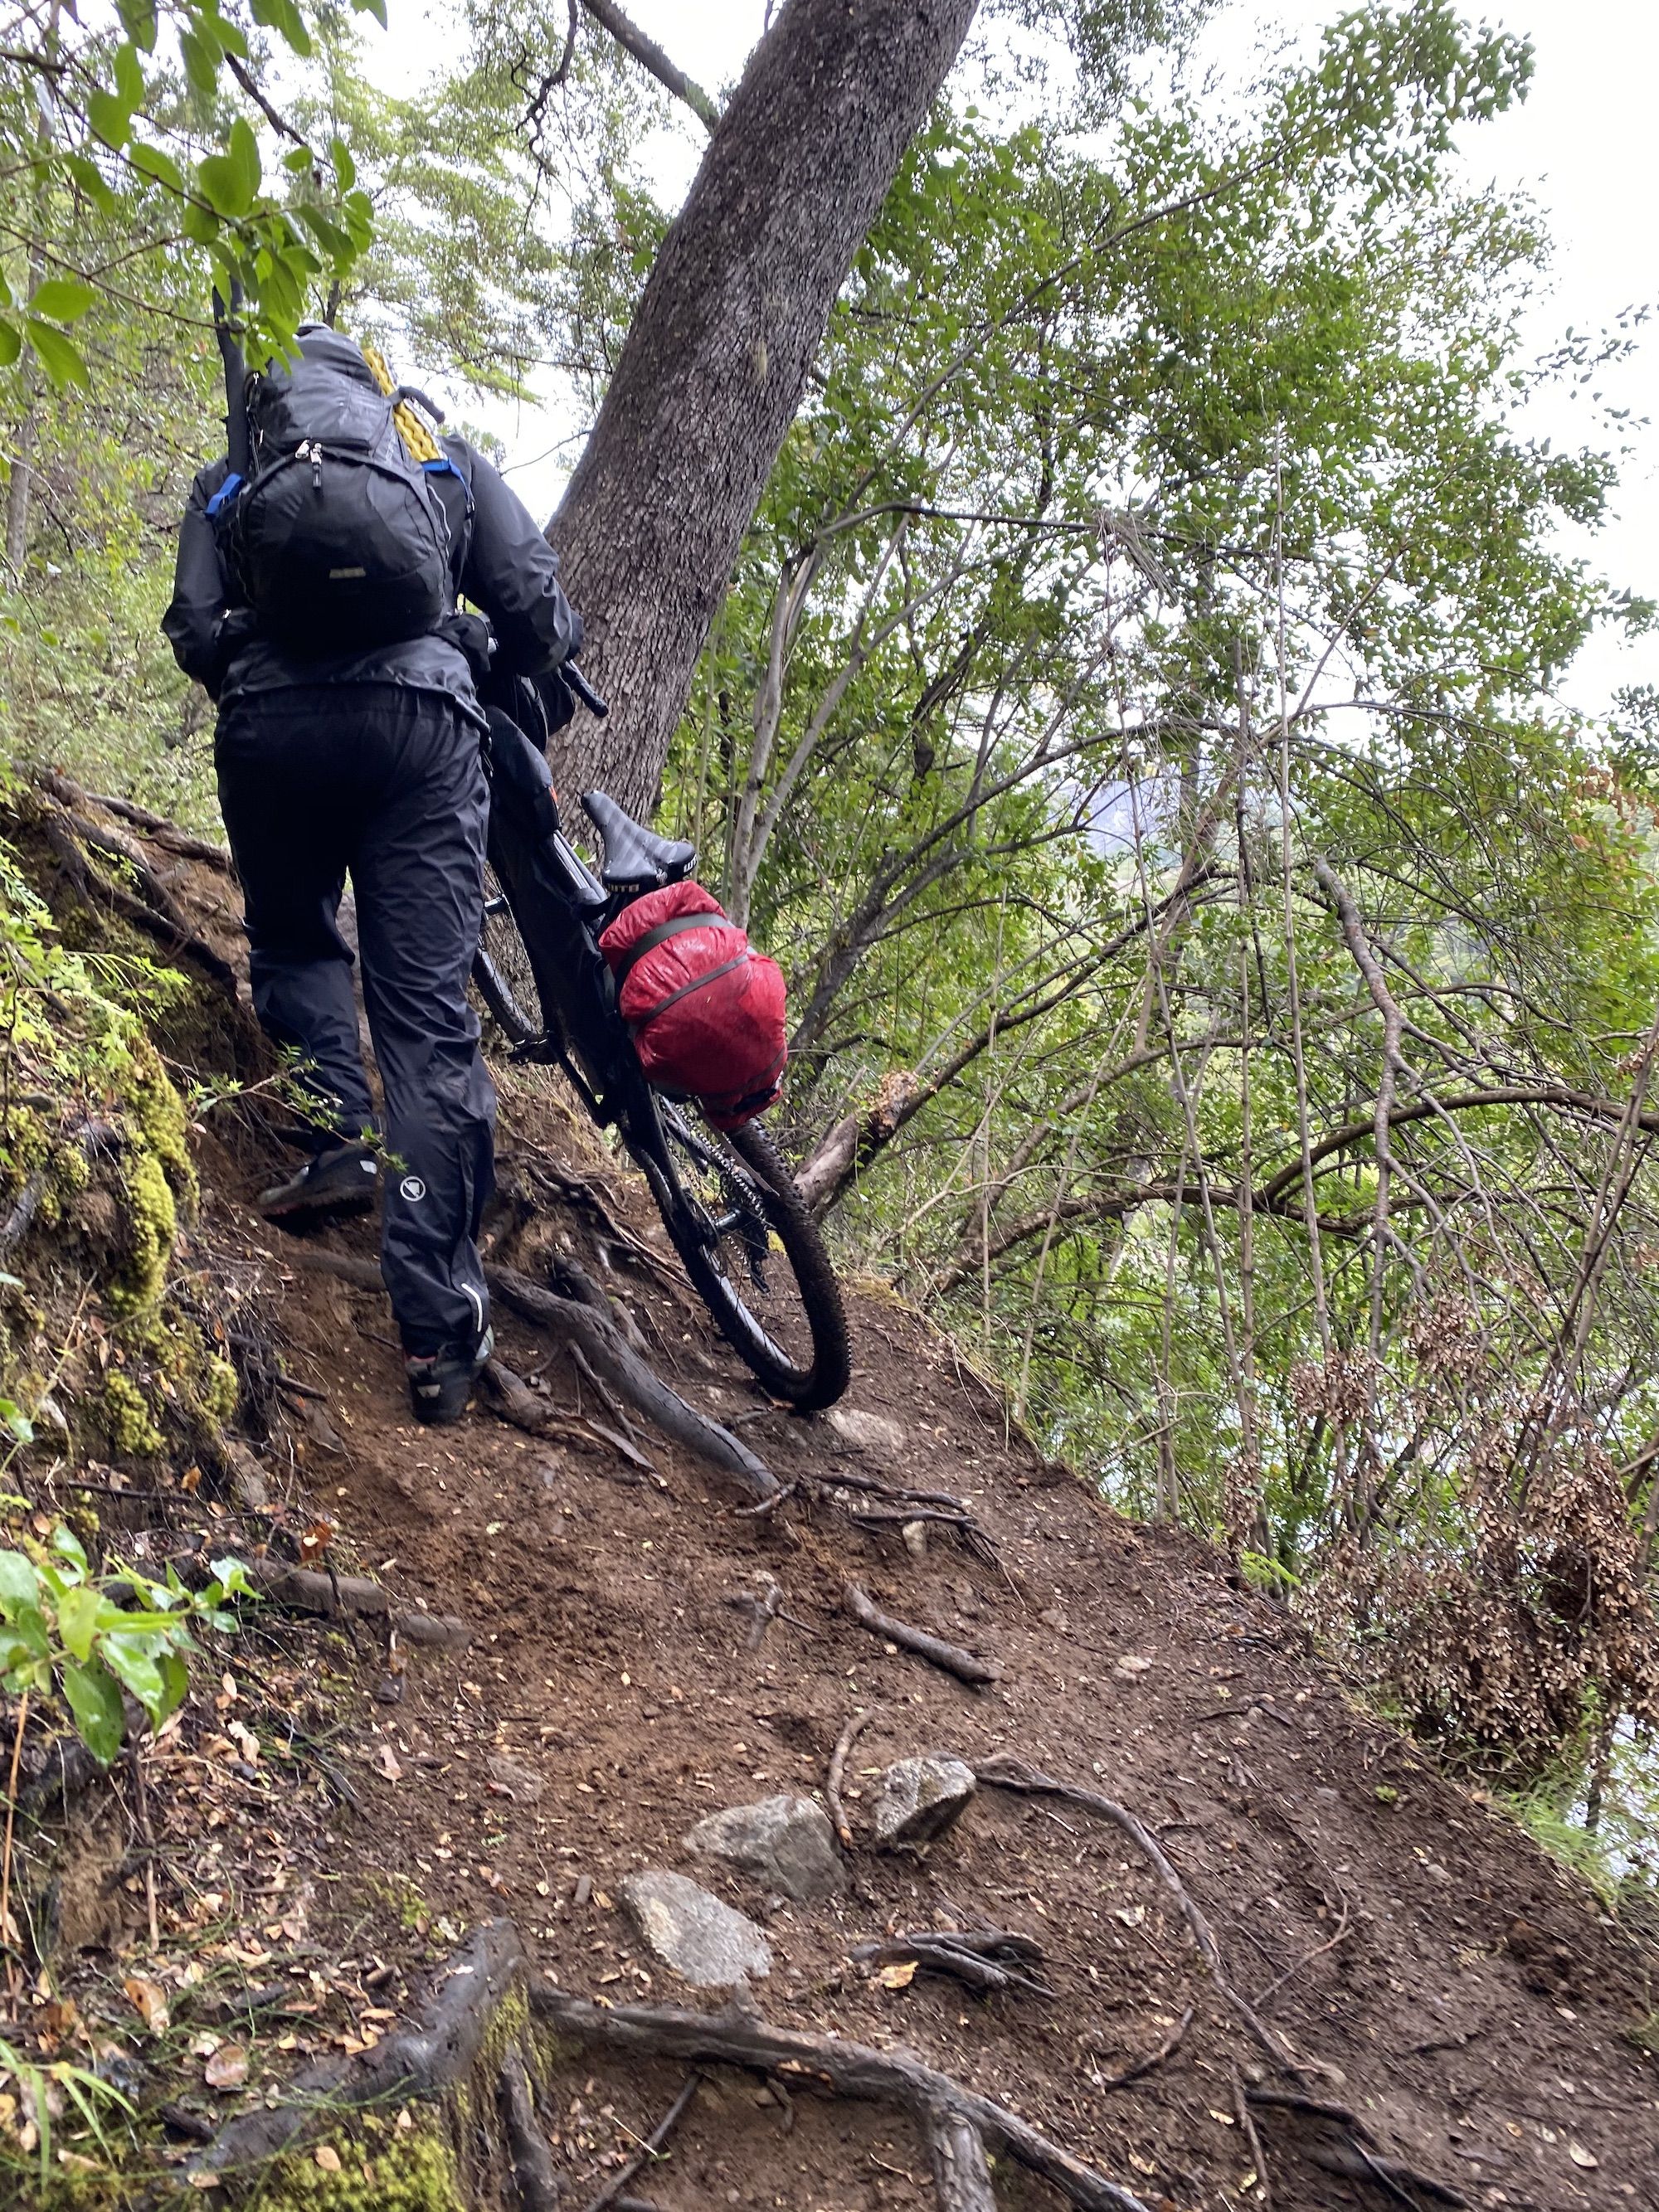 A man pulling his bike up a steep, rooted, path